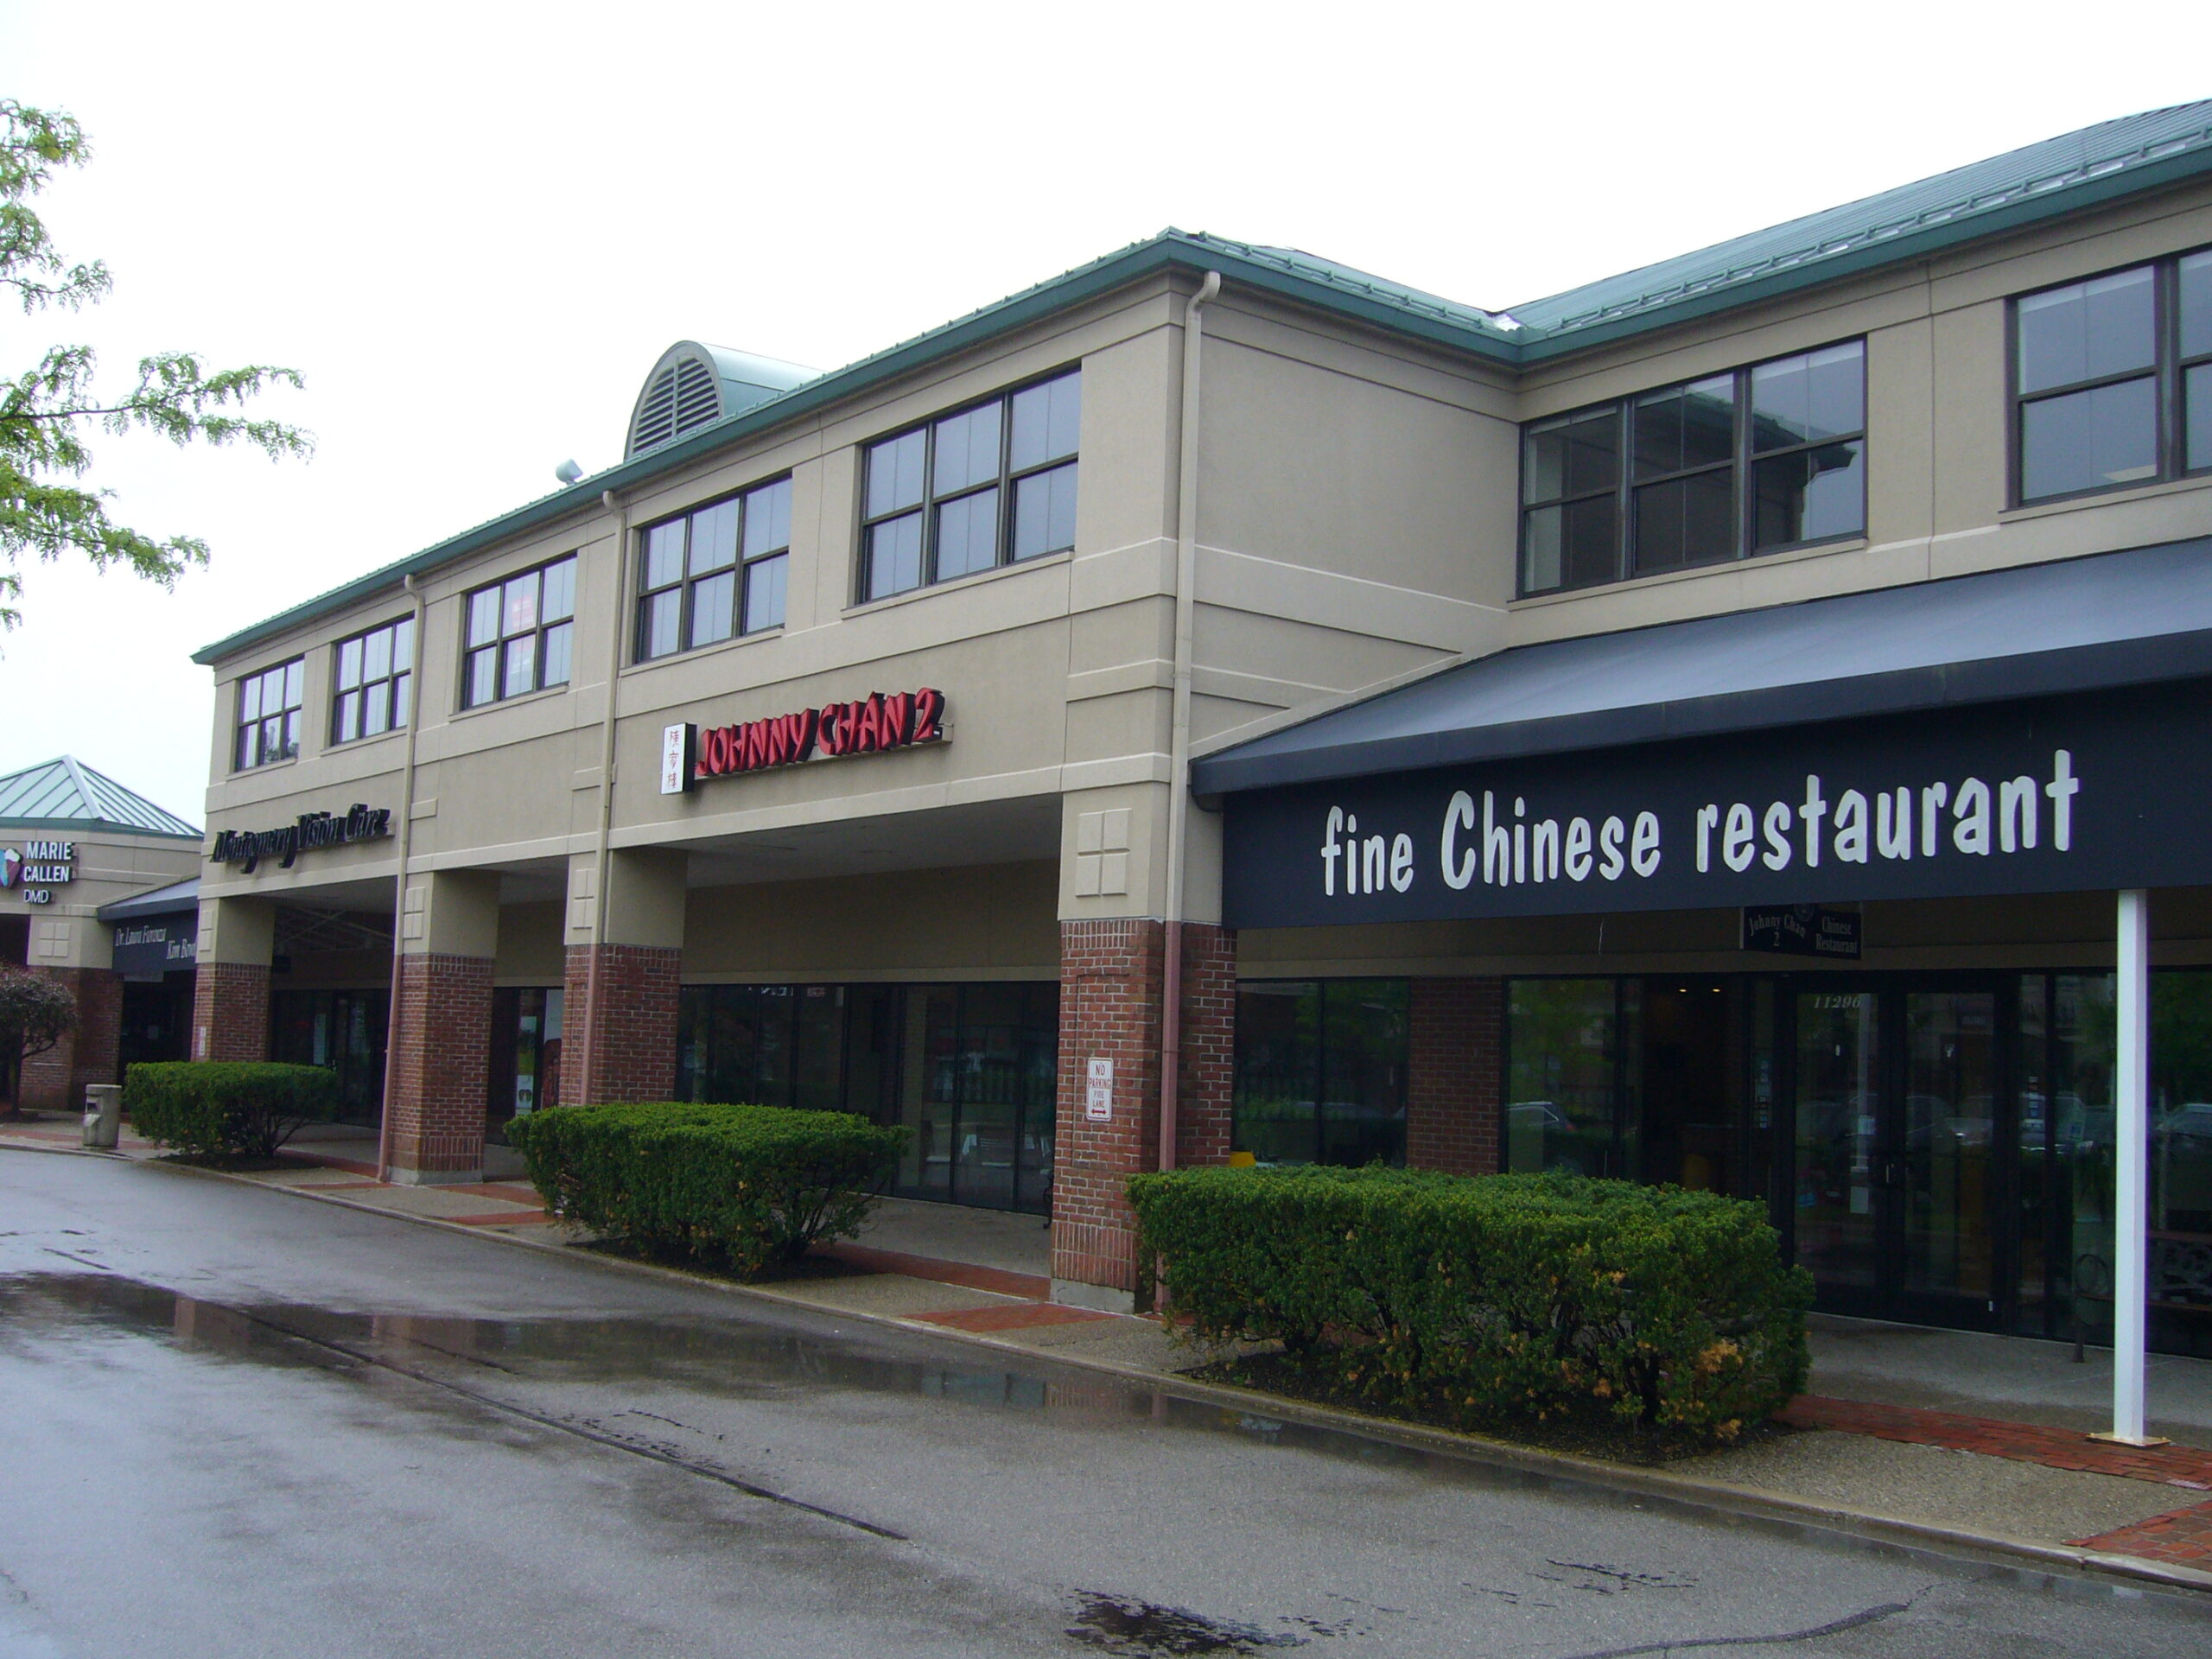 Johnny Chan 2 fits profile of Chinese healthy cuisine